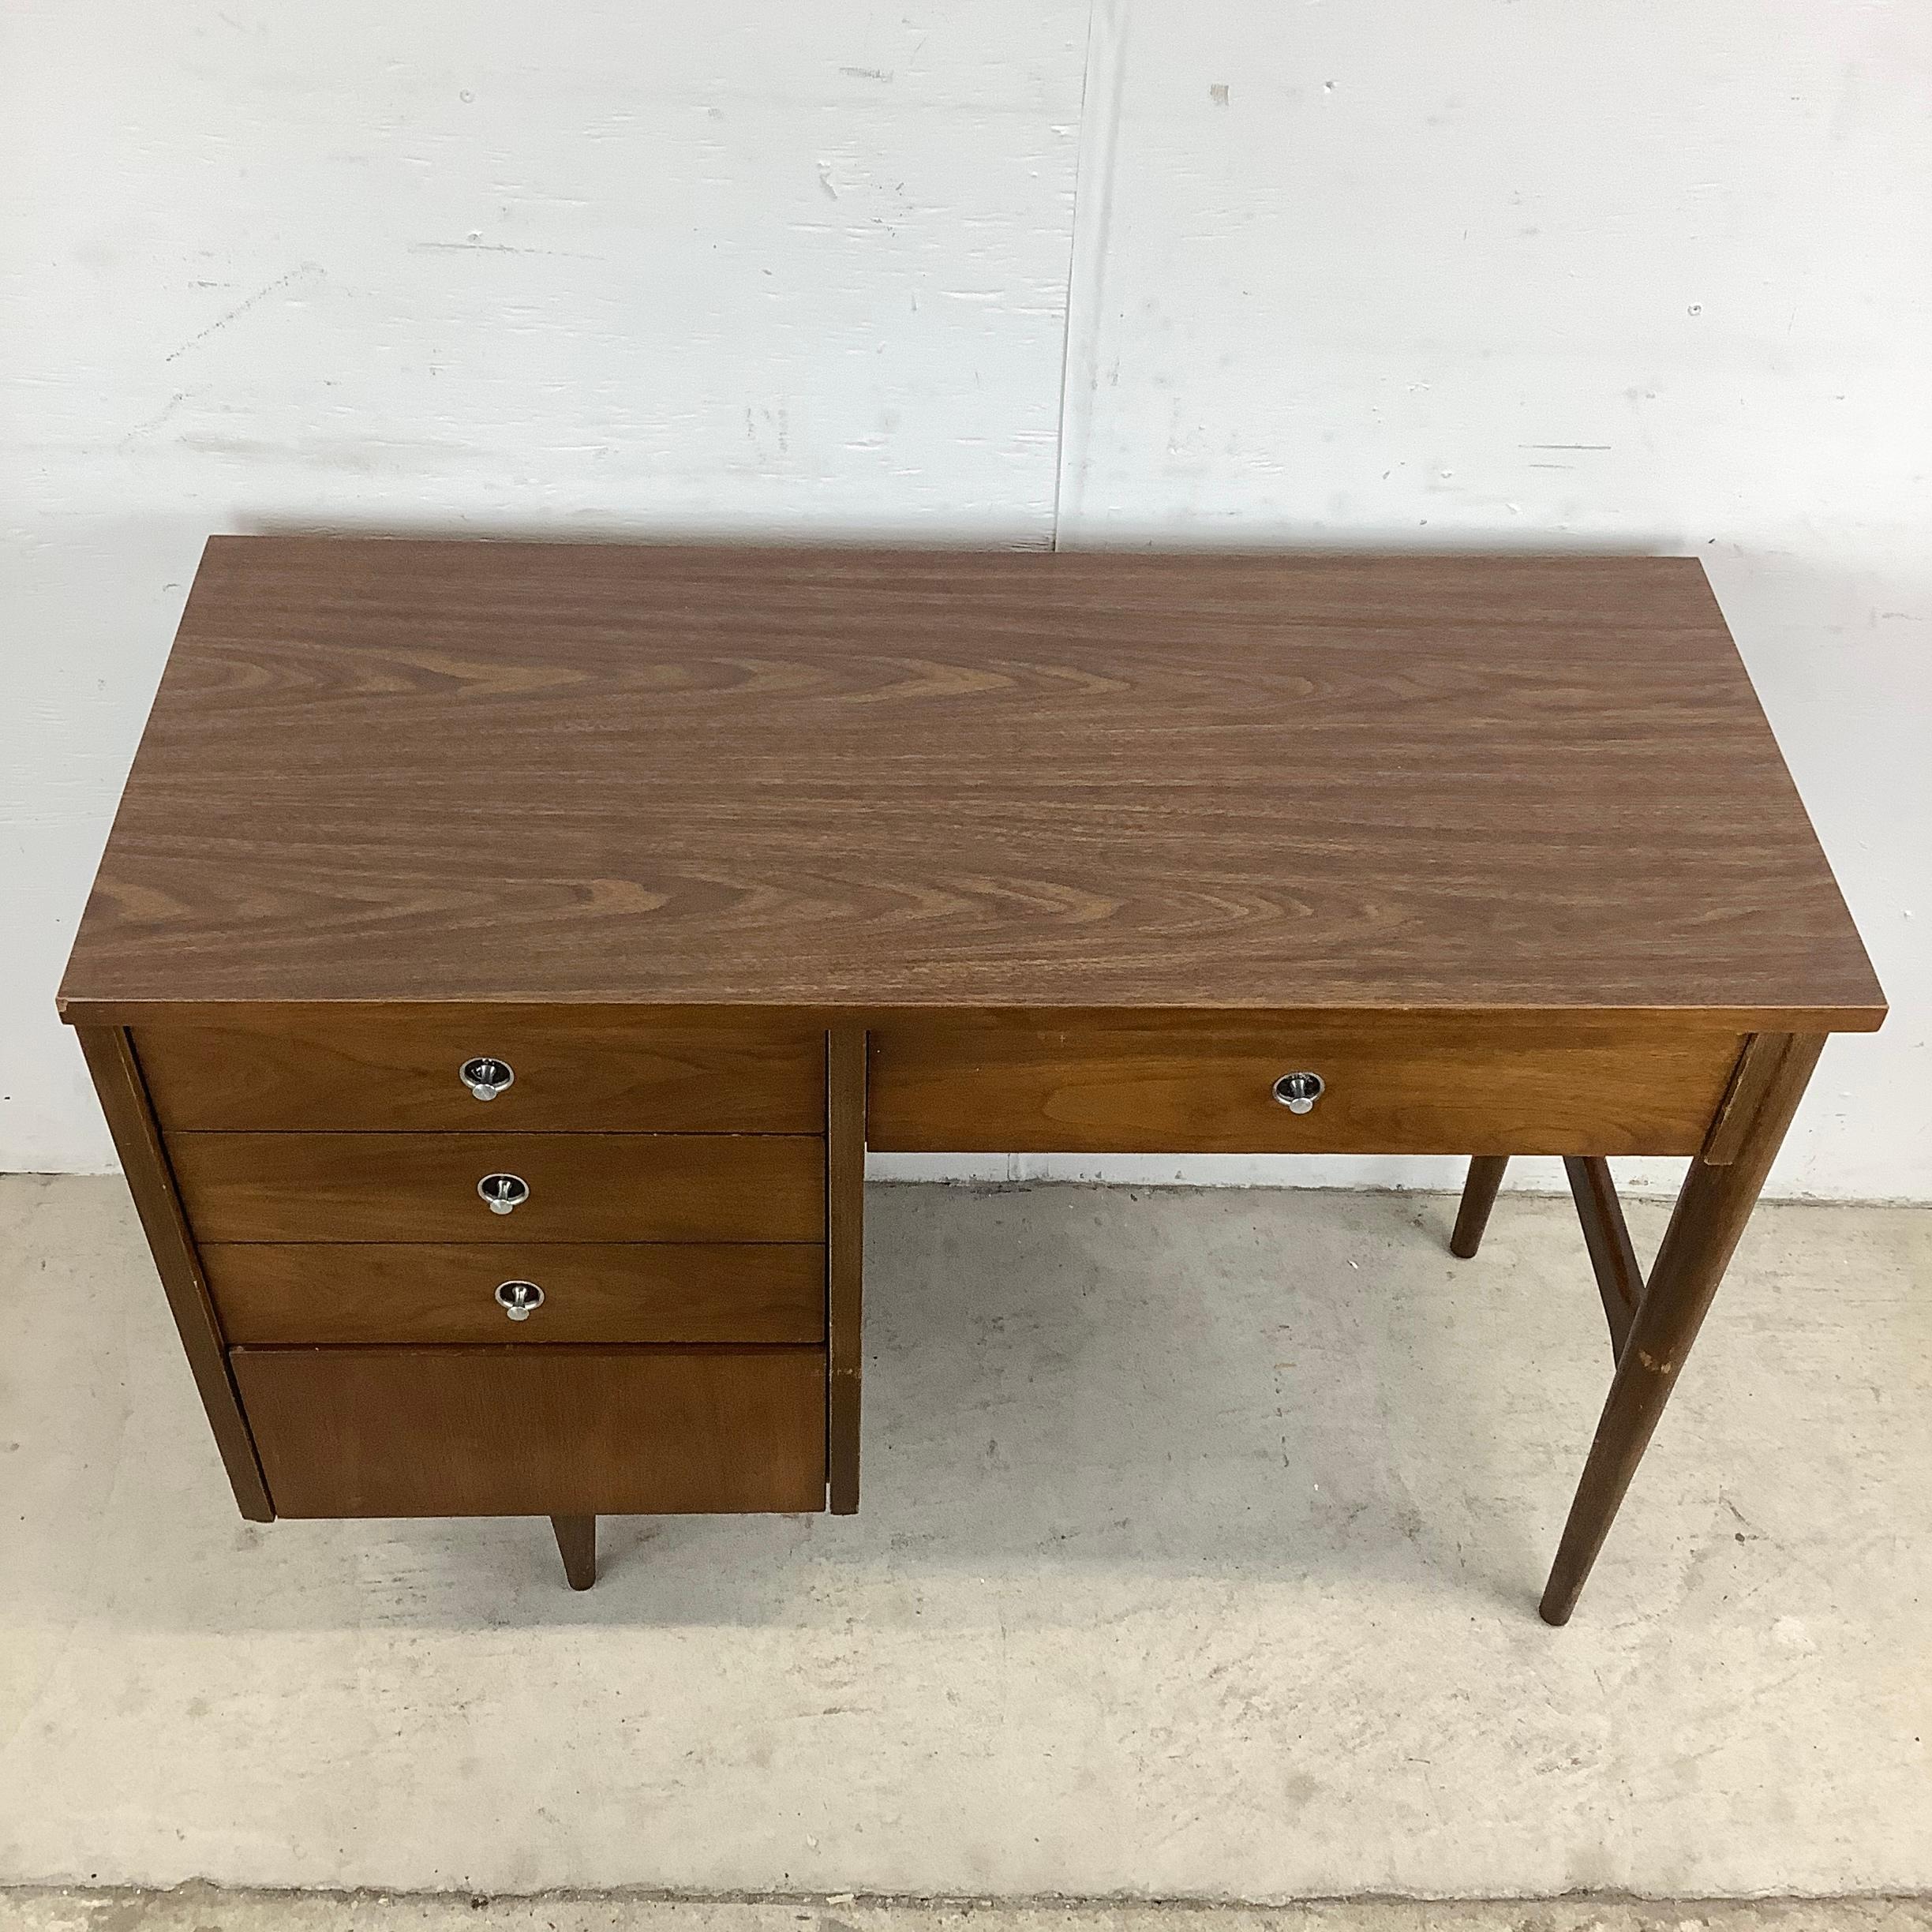 This Vintage Writing Desk by Bassett Furniture offers a charming touch of practical mid-century style to any space. More than just a workspace this petite vintage desk is not just a functional addition to your home office or study space; it offers a